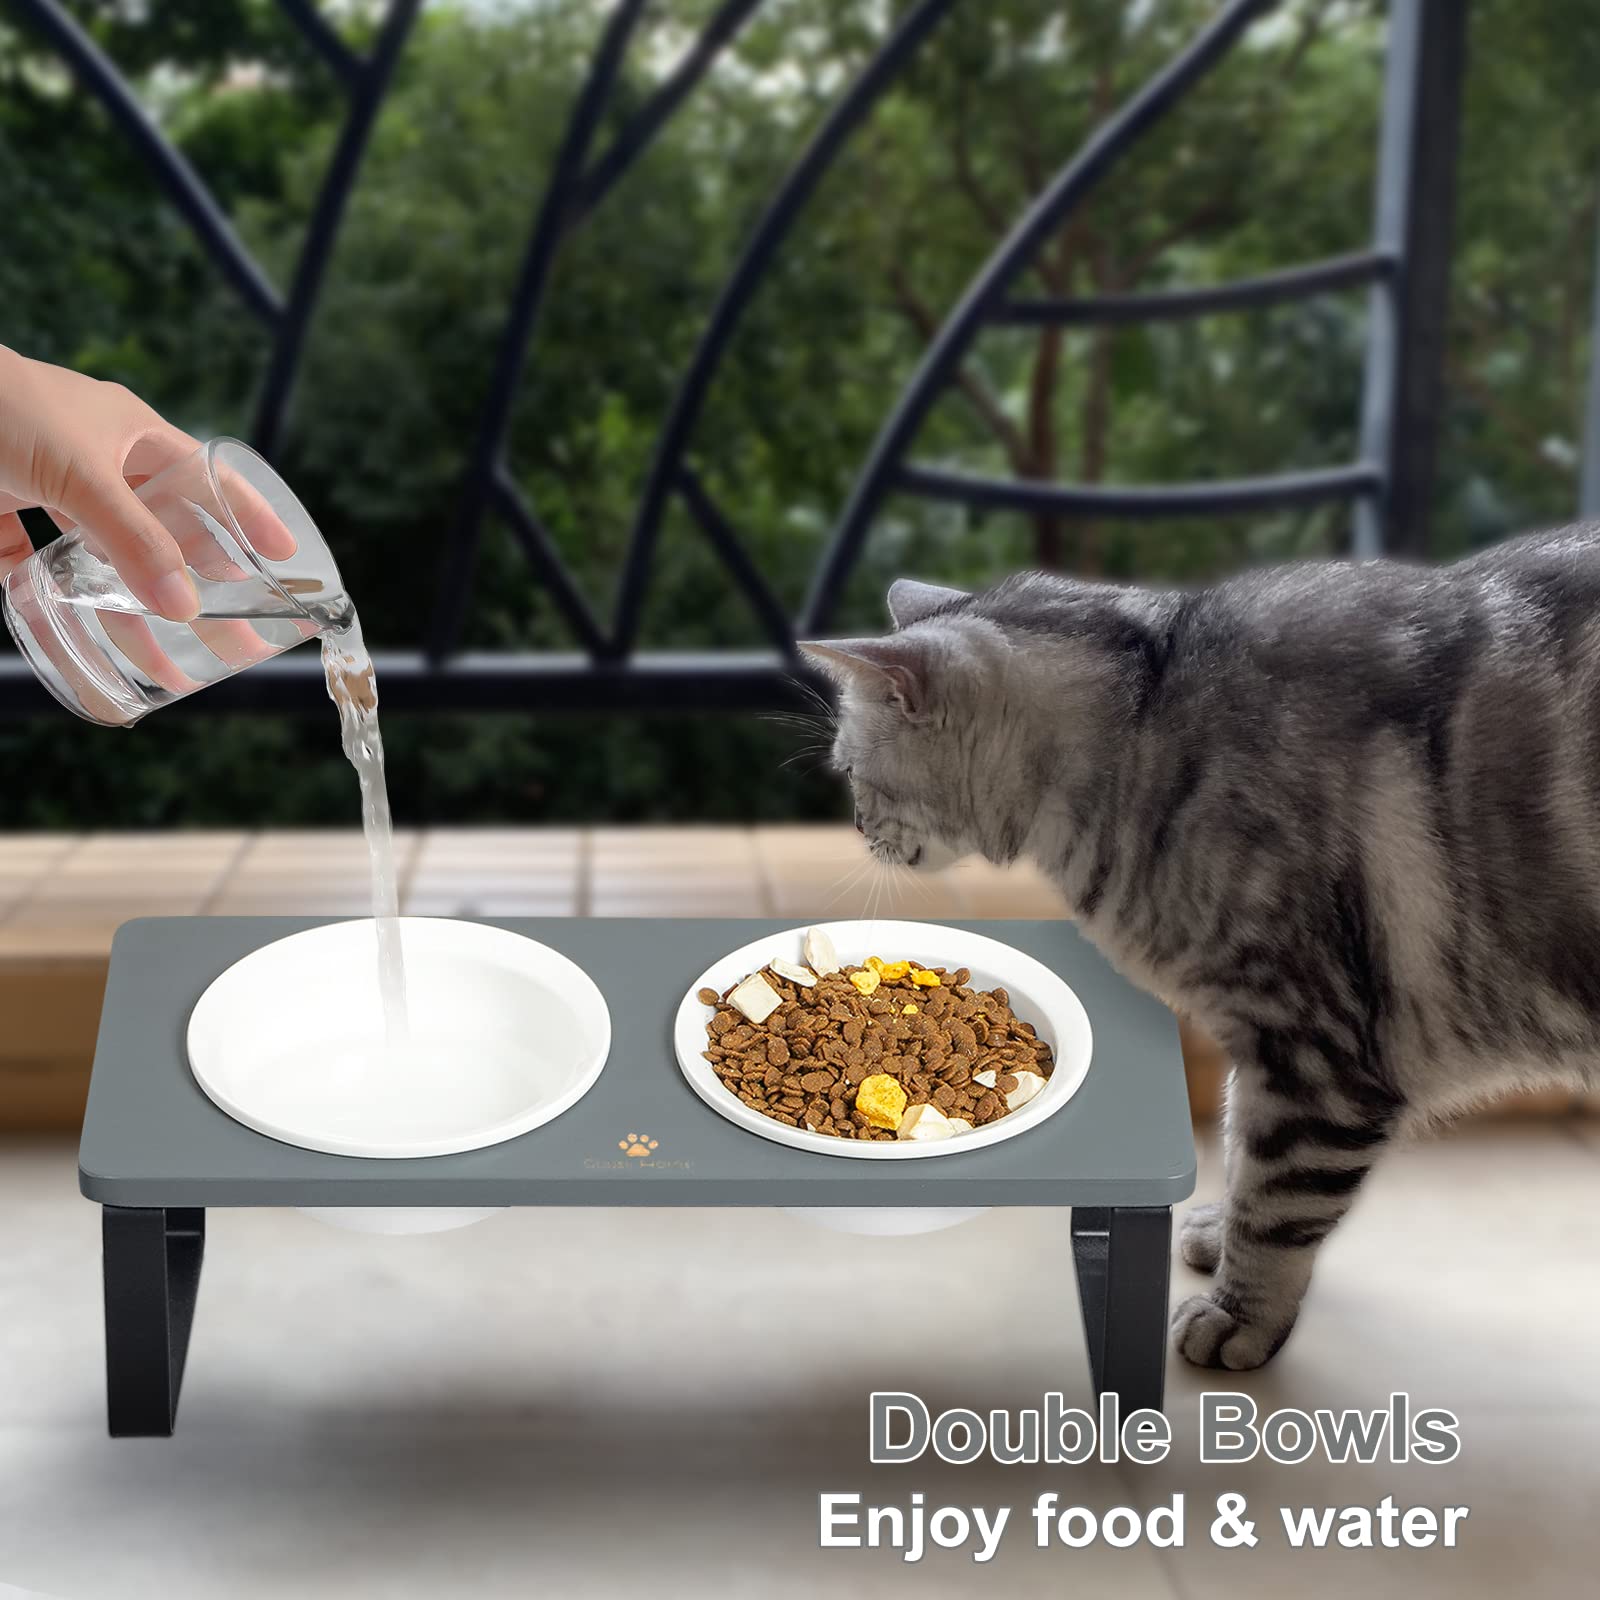 Elevated Cat Food Bowl - Whisker Friendly Elevated Cat Food Bowls For Food  - Ergonomic Tilted Raised Cat Dish, Pet Water Or Food Feeding Station For I